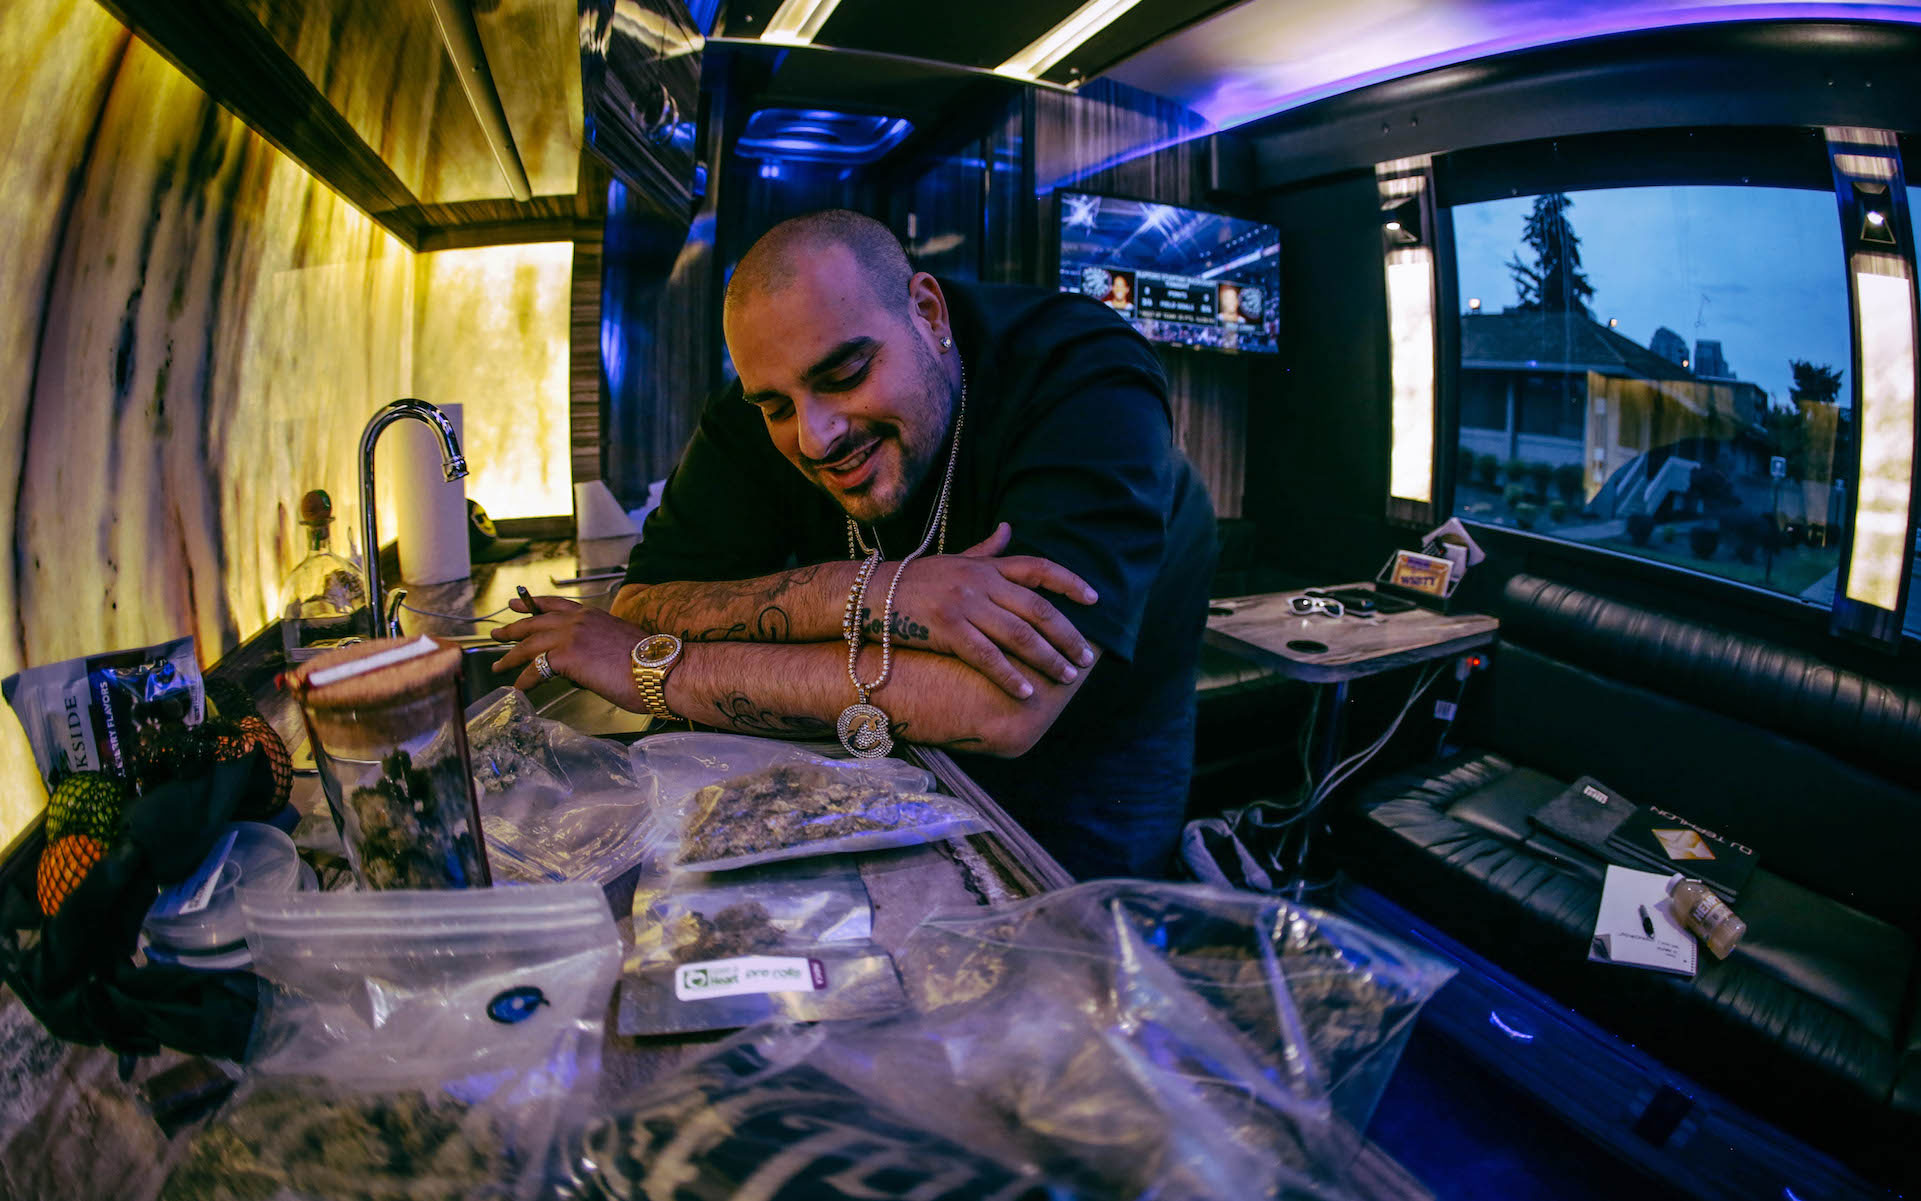 28 grams of game from Berner’s inspiring rise to the top